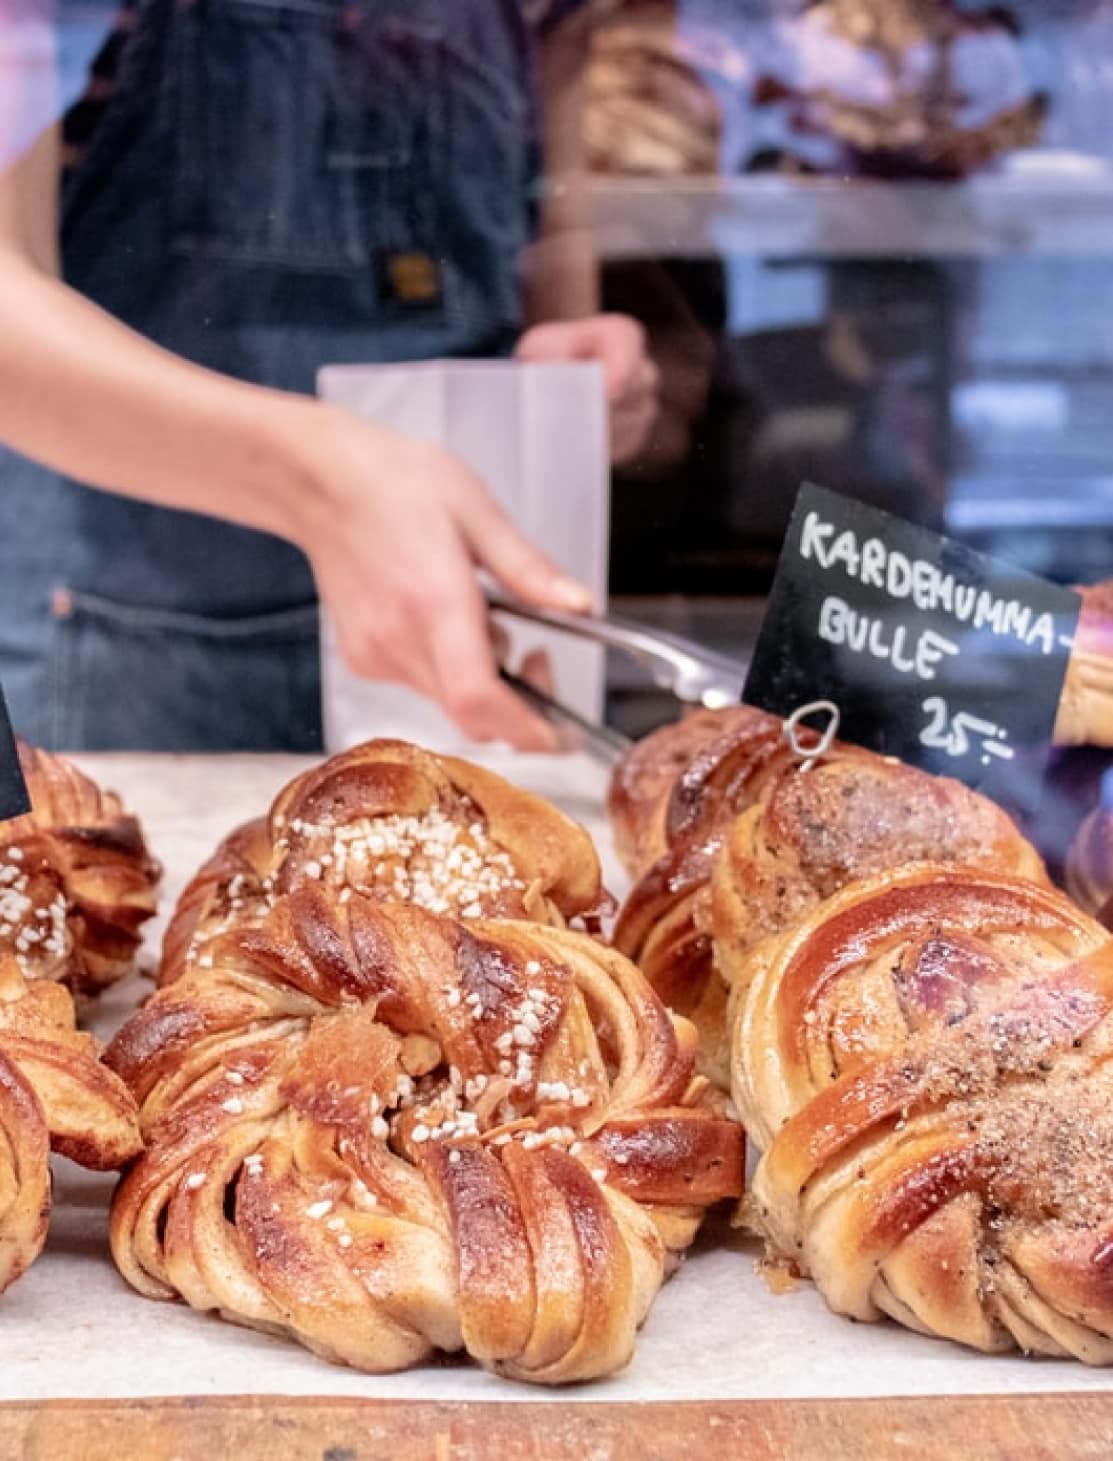 Pastries being served in Stockholm